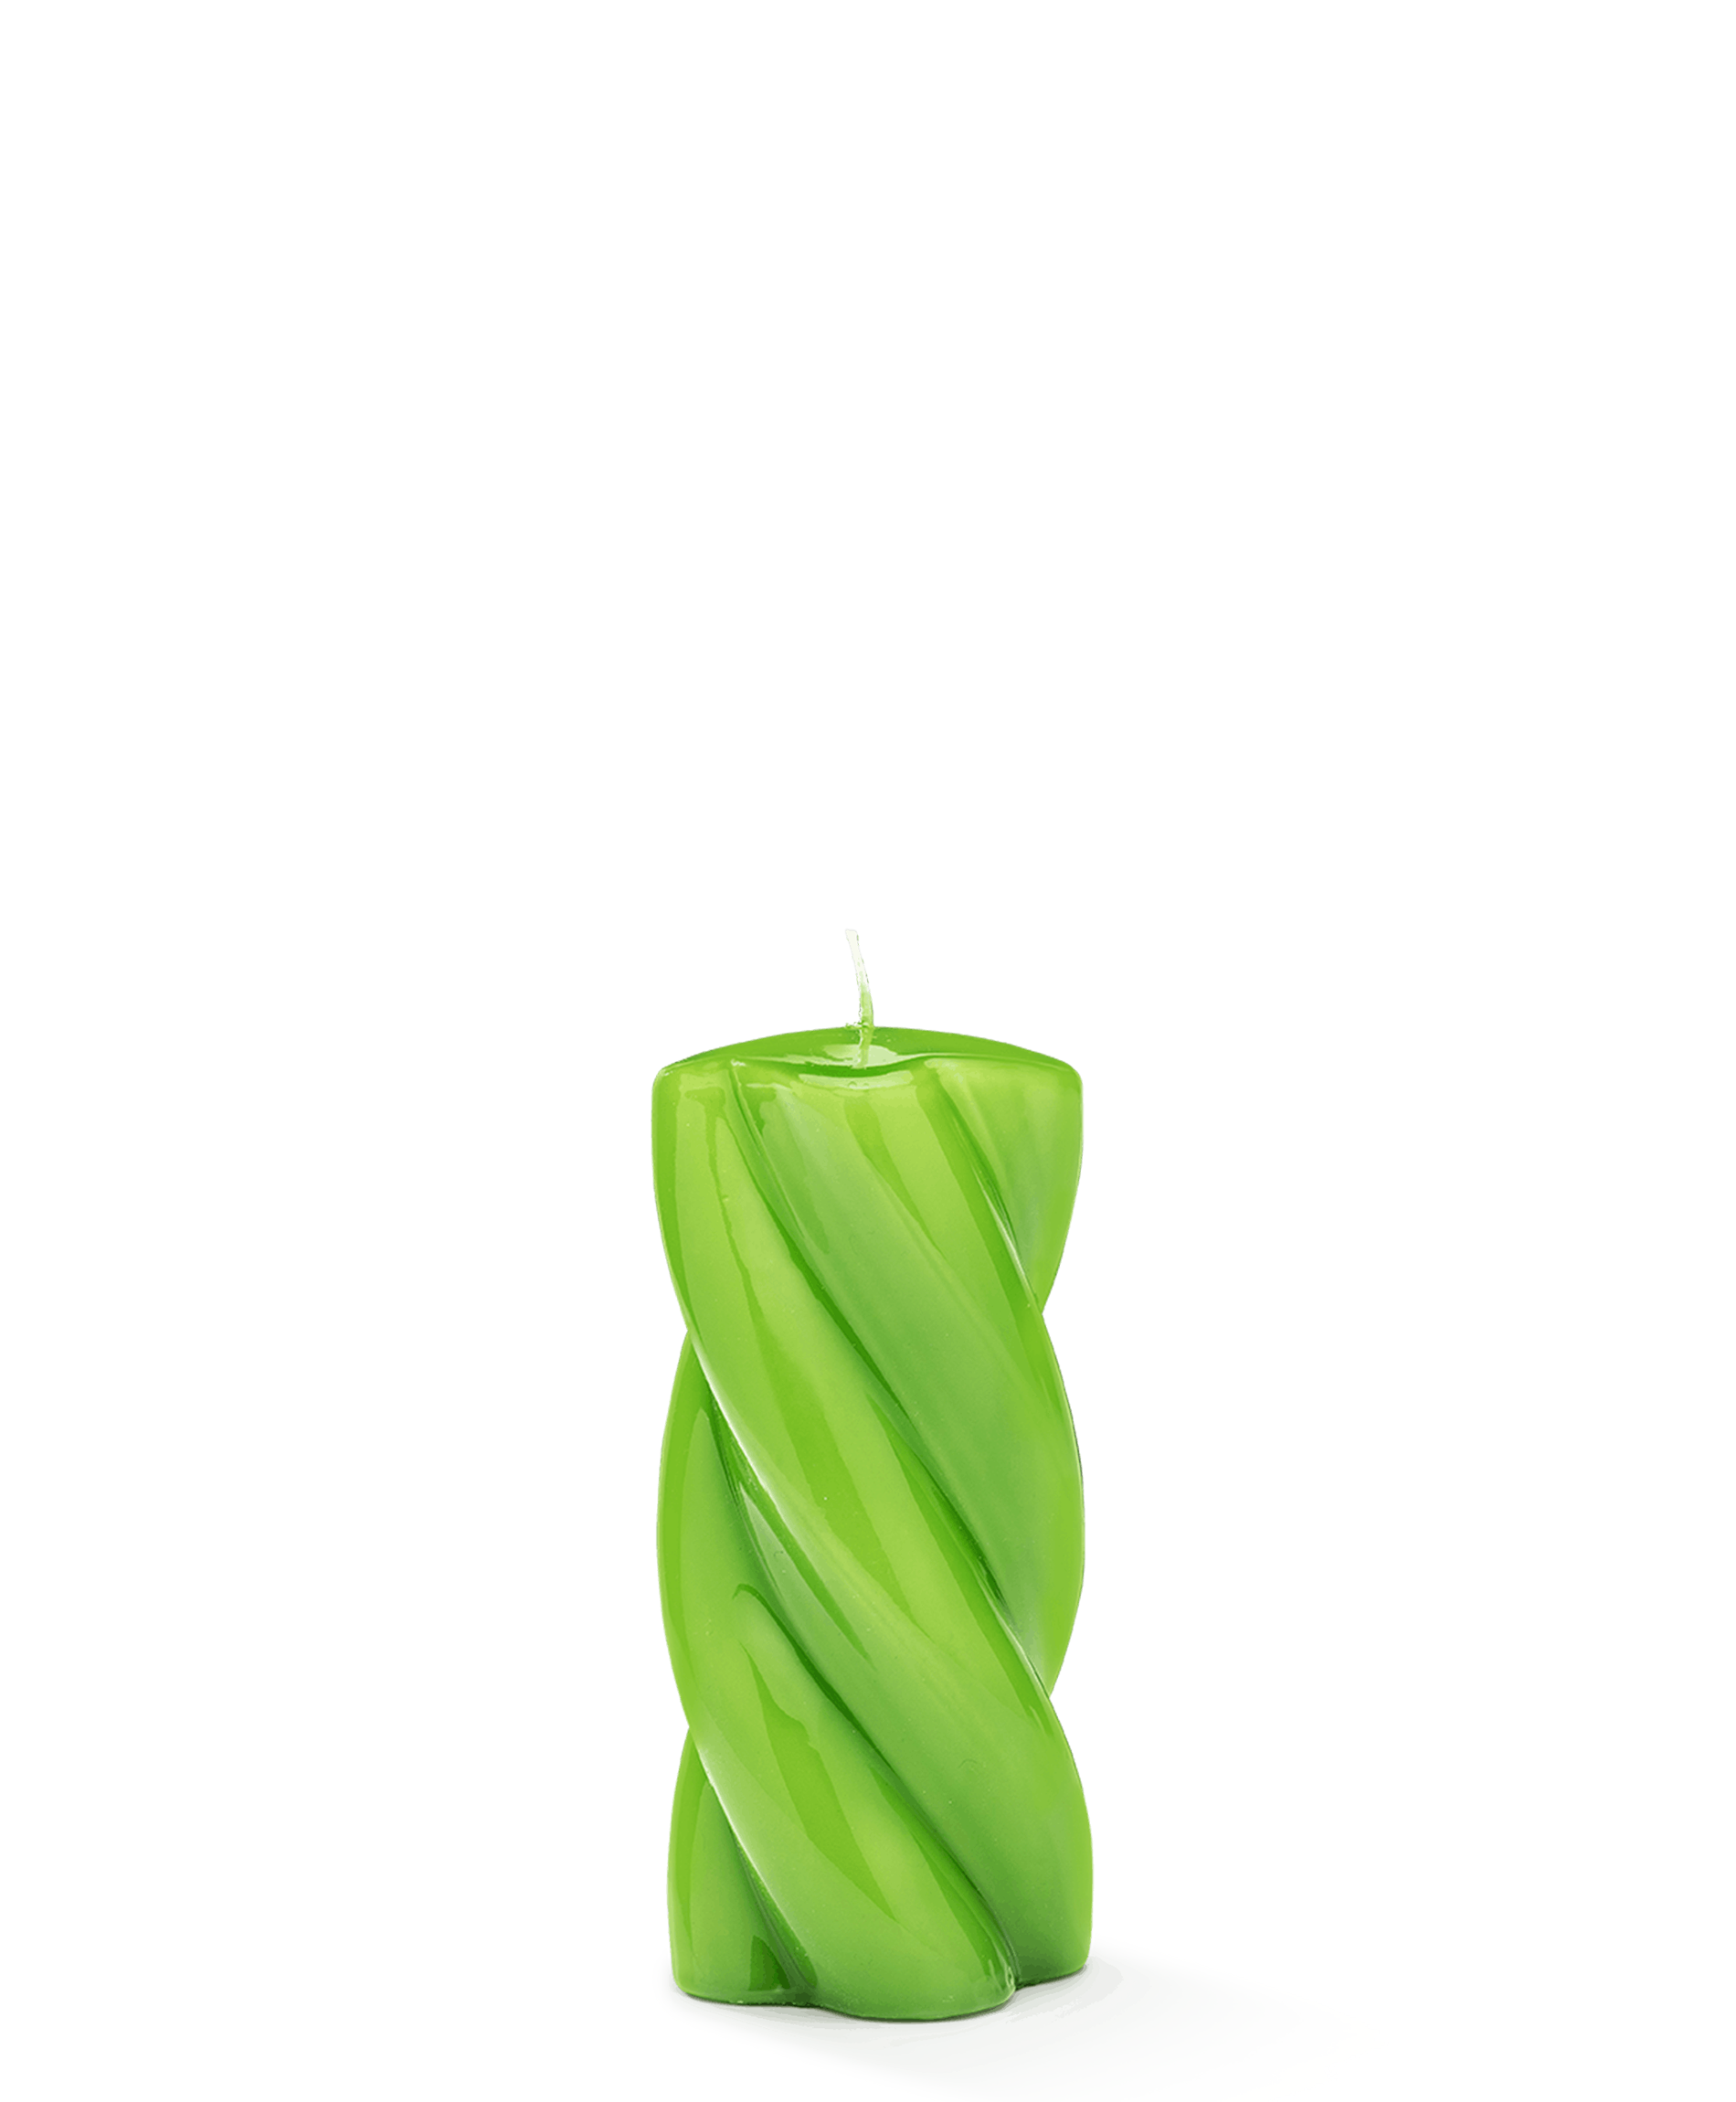 Anna + Nina Blunt Twisted Candle Long Moss Green